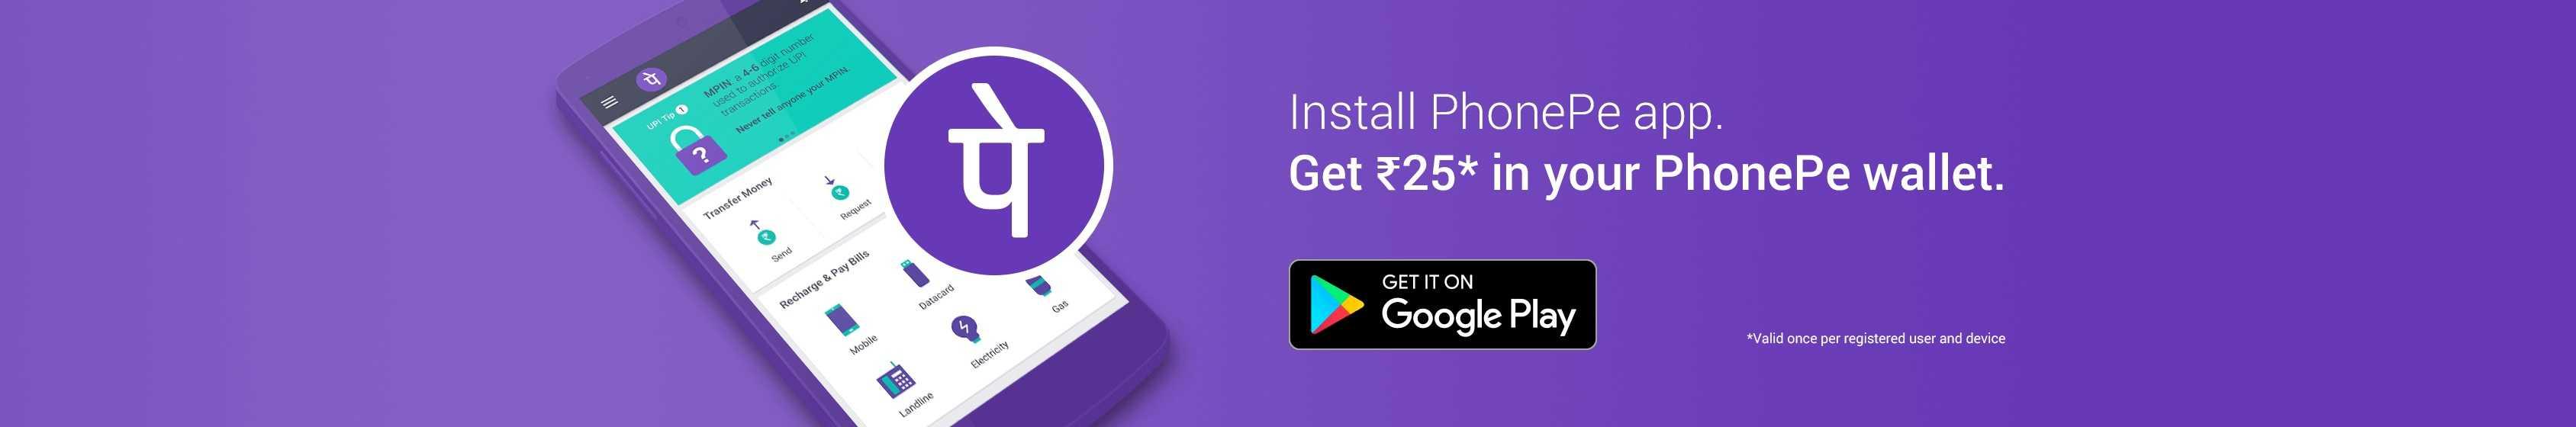 PhonePe Wallet - Send Rs.1 money to anyone & Get Rs.50 Cashback